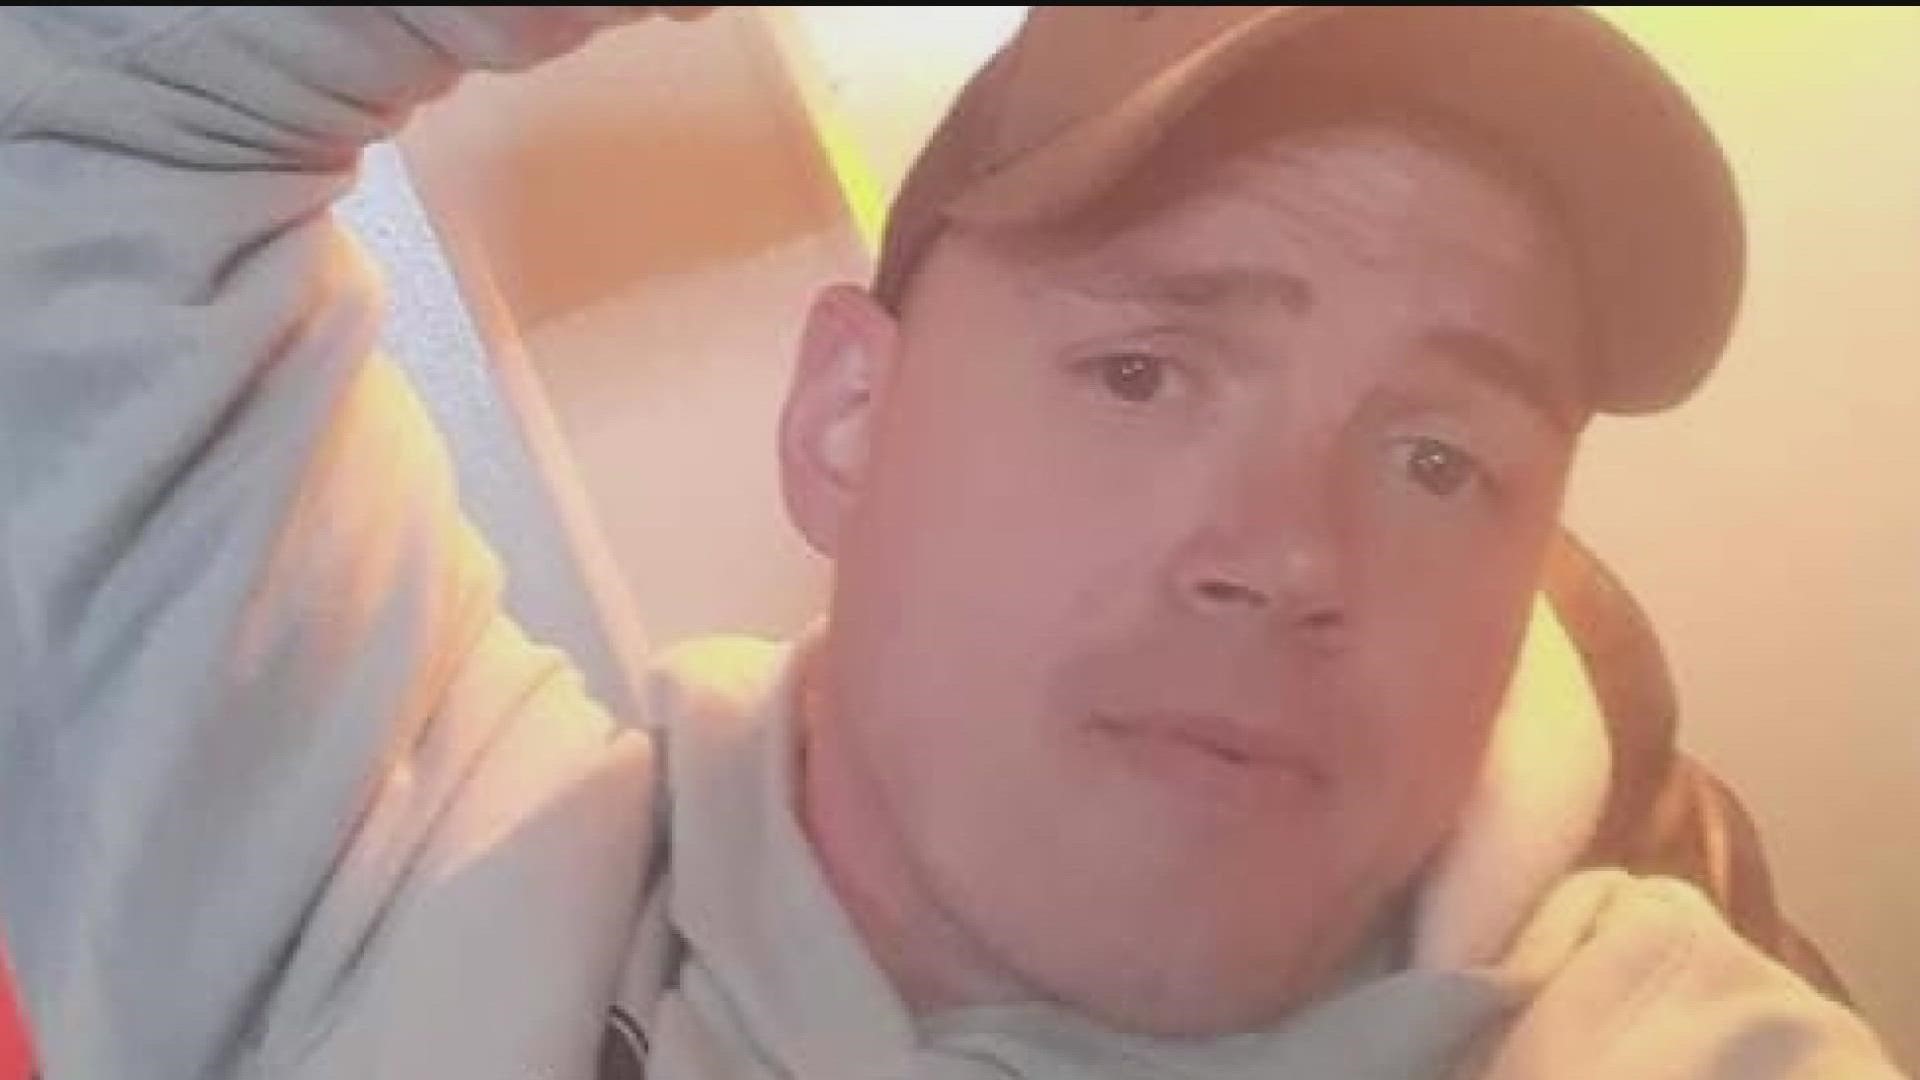 Wood River police are asking for the public's help in finding Vernon Law, who was last seen July 21. He walked off his work boat in Wood River and wasn't seen again.